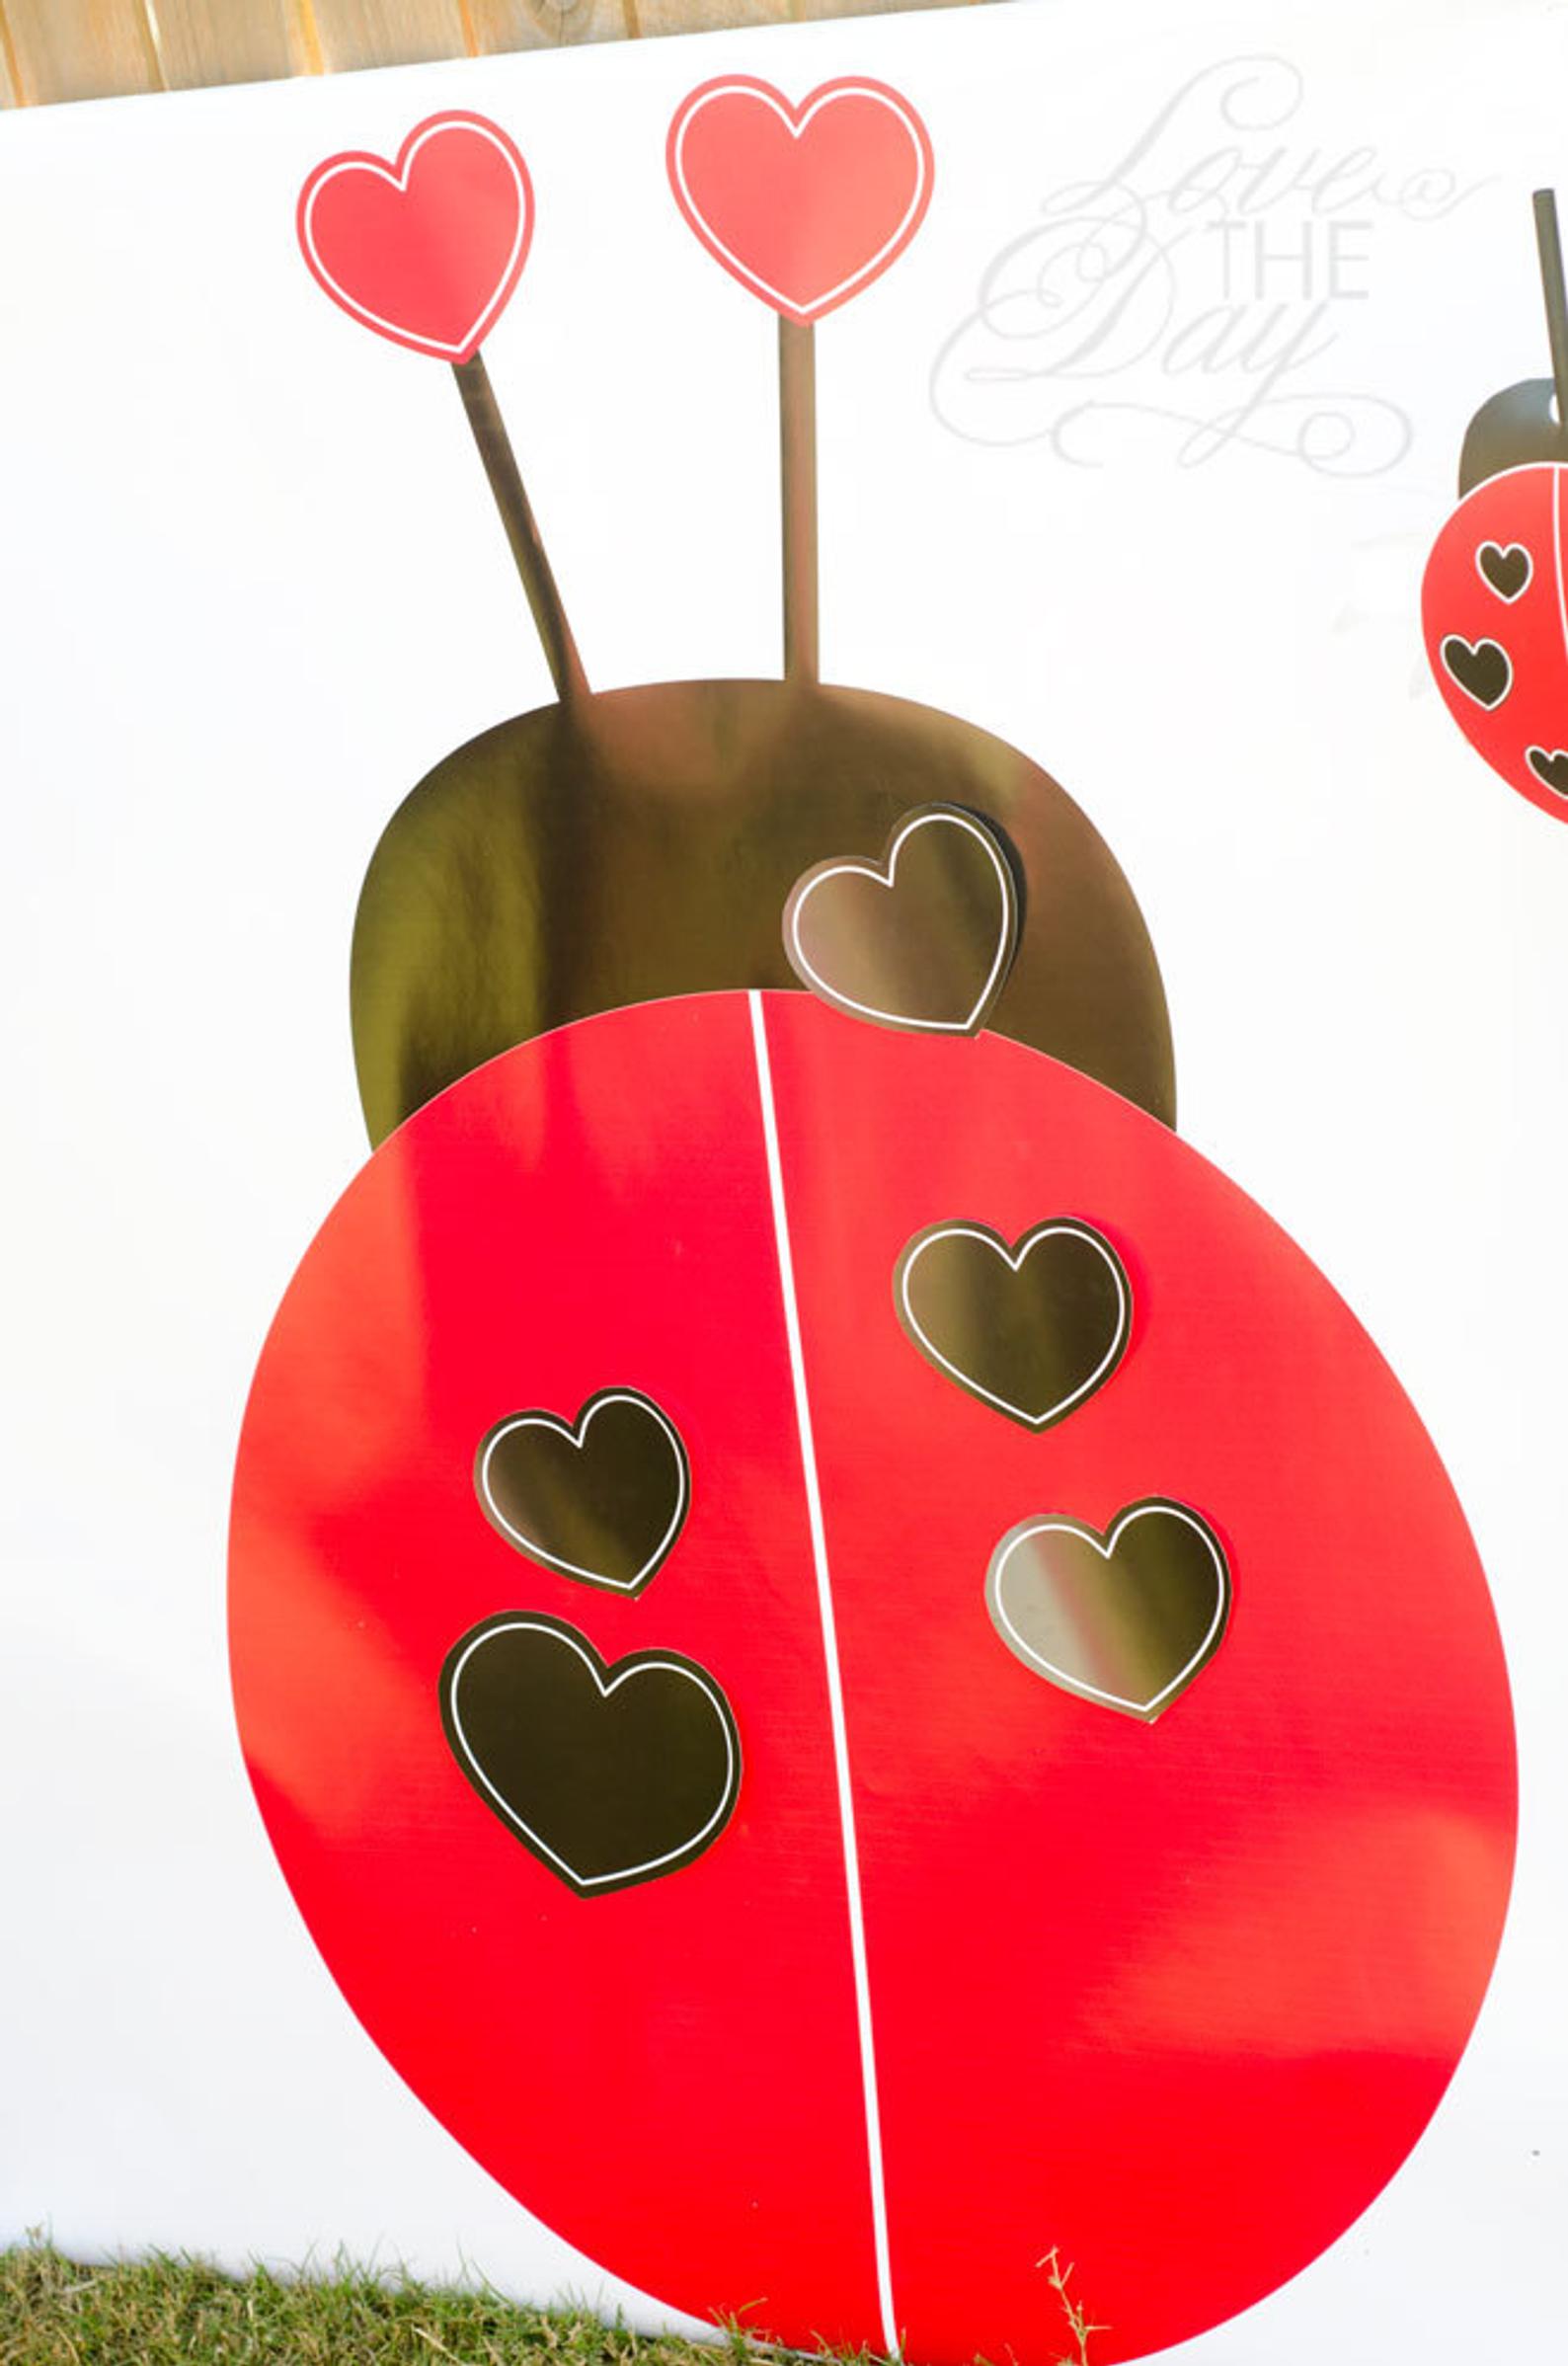 Pin The Heart on the Ladybug Party Game on Love The Day